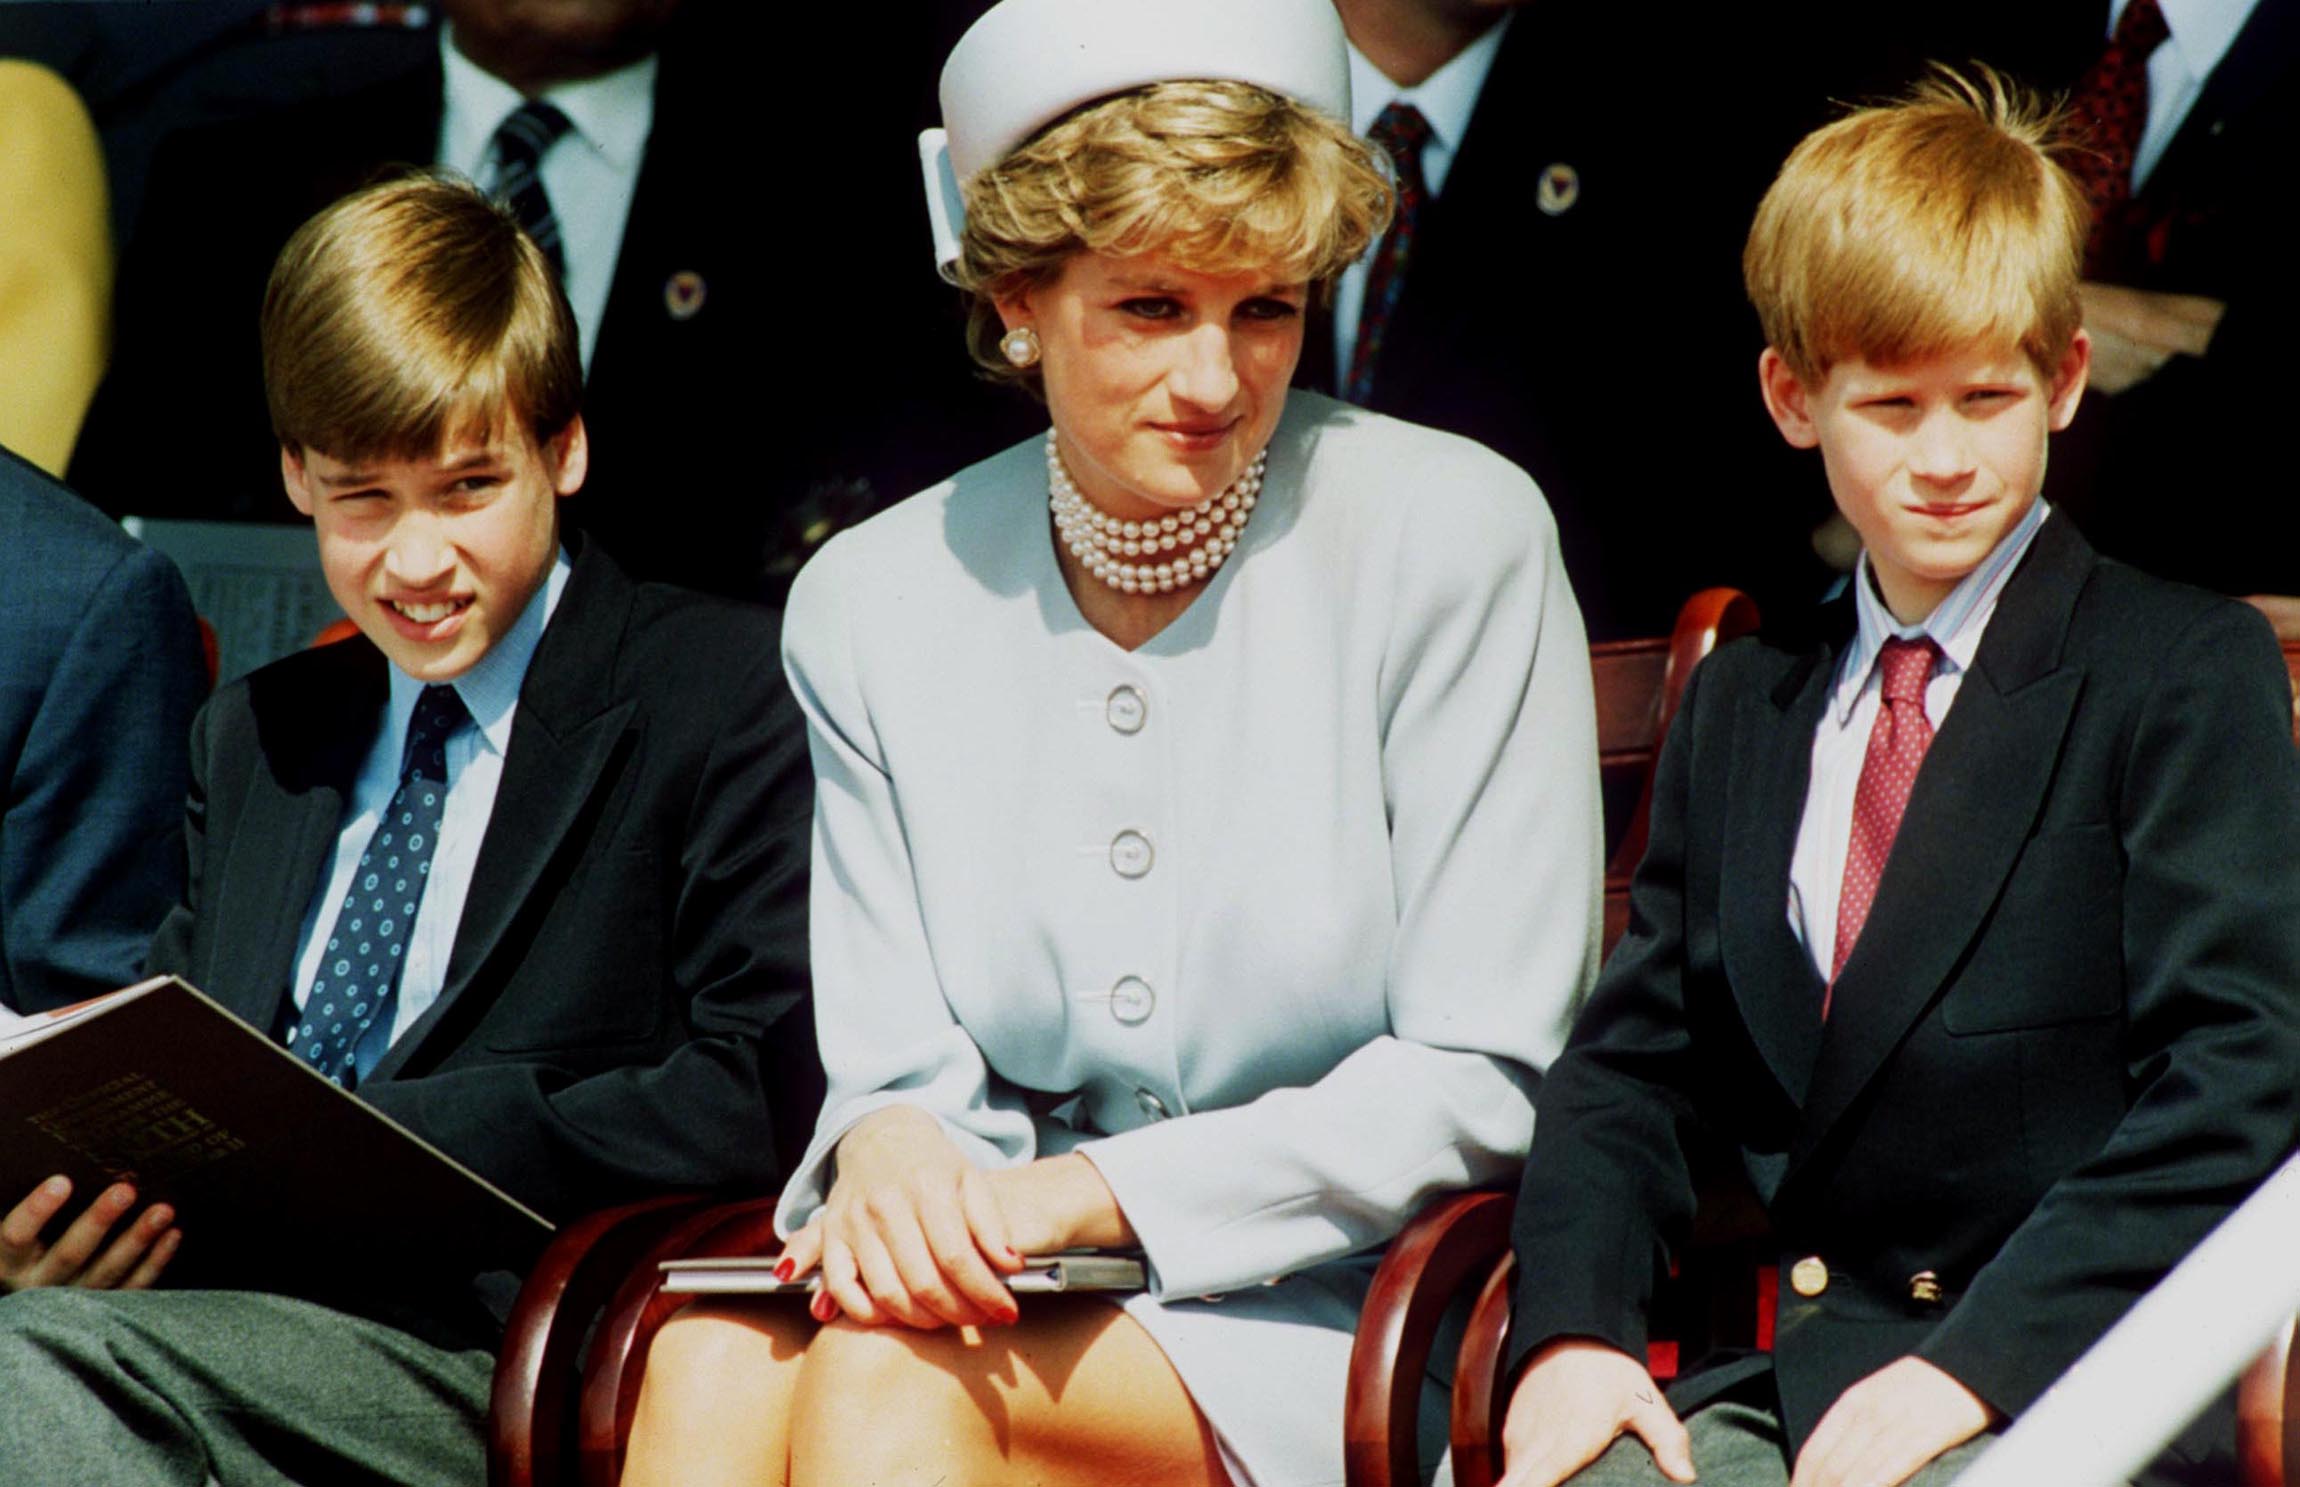 Princess Diana in Lone with Prince William and Prince Harry in 1995. | Source: Getty Images